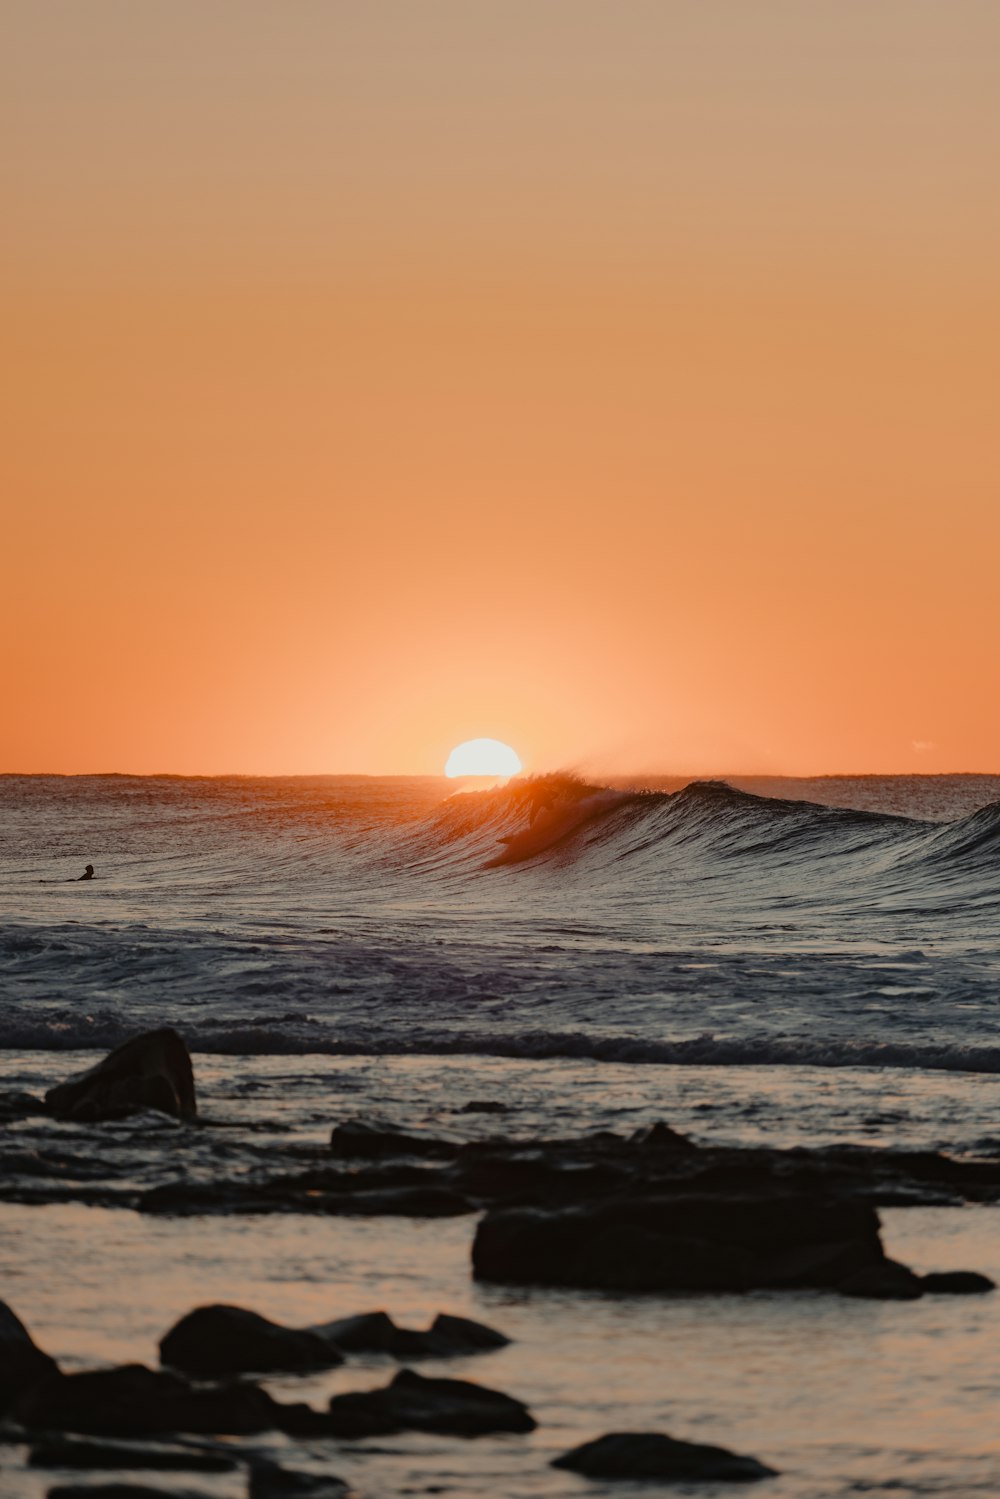 the sun is setting over the ocean with a wave coming in